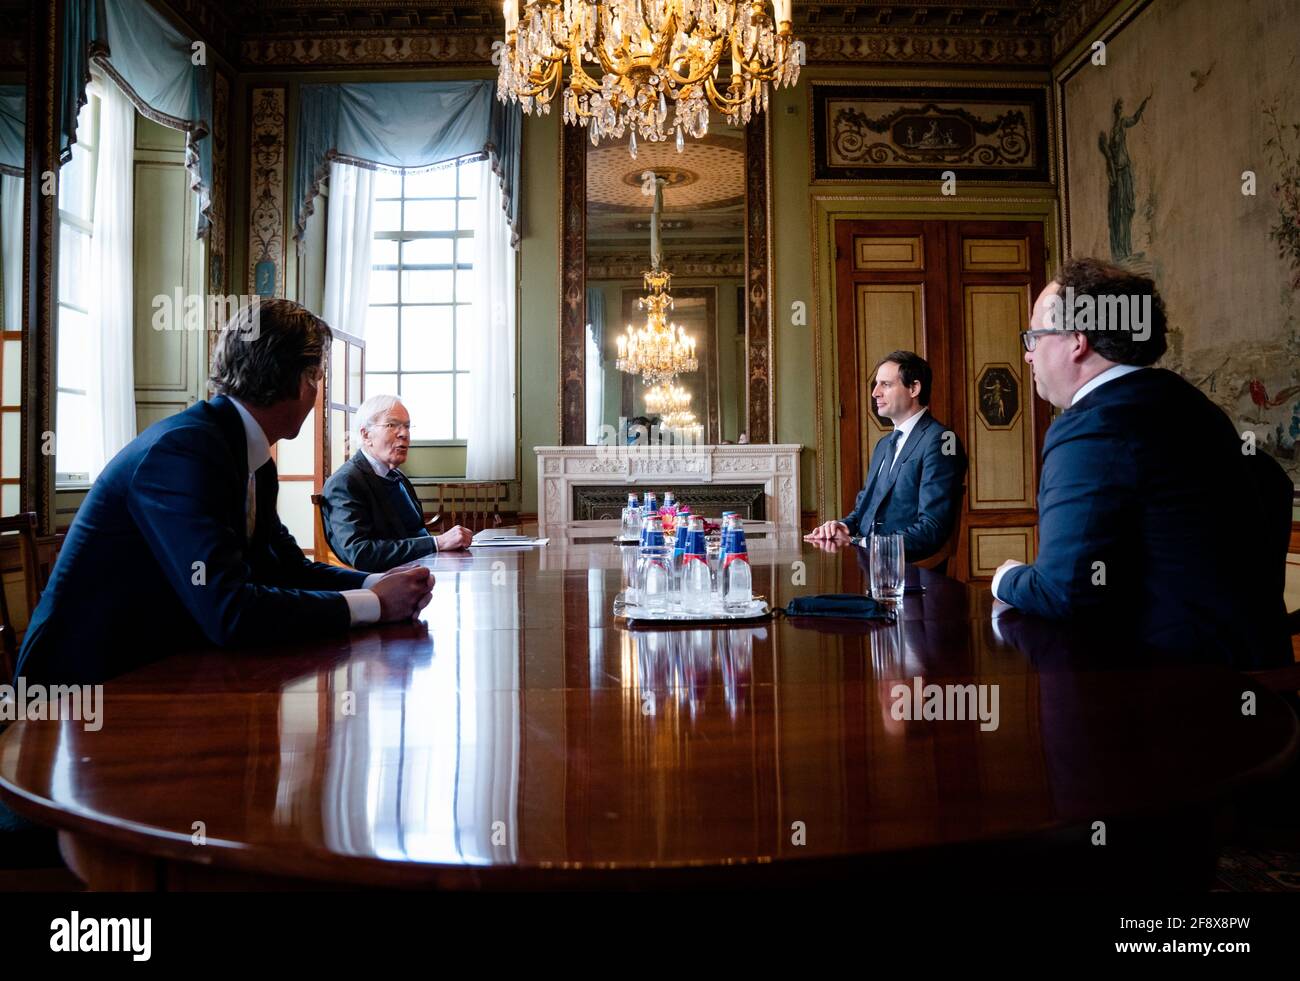 The Hague, Netherlands. April 15 2021: 10:59:50 Informator Herman Tjeenk Willink has a meeting with Minister of Finance Wopke Hoekstra, Minister of Social Affairs and Employment Wouter Koolmees and Minister of Economic Affairs and Climate Bas van Õt Wout. ANP BART SIZE Credit: ANP/Alamy Live News Stock Photo